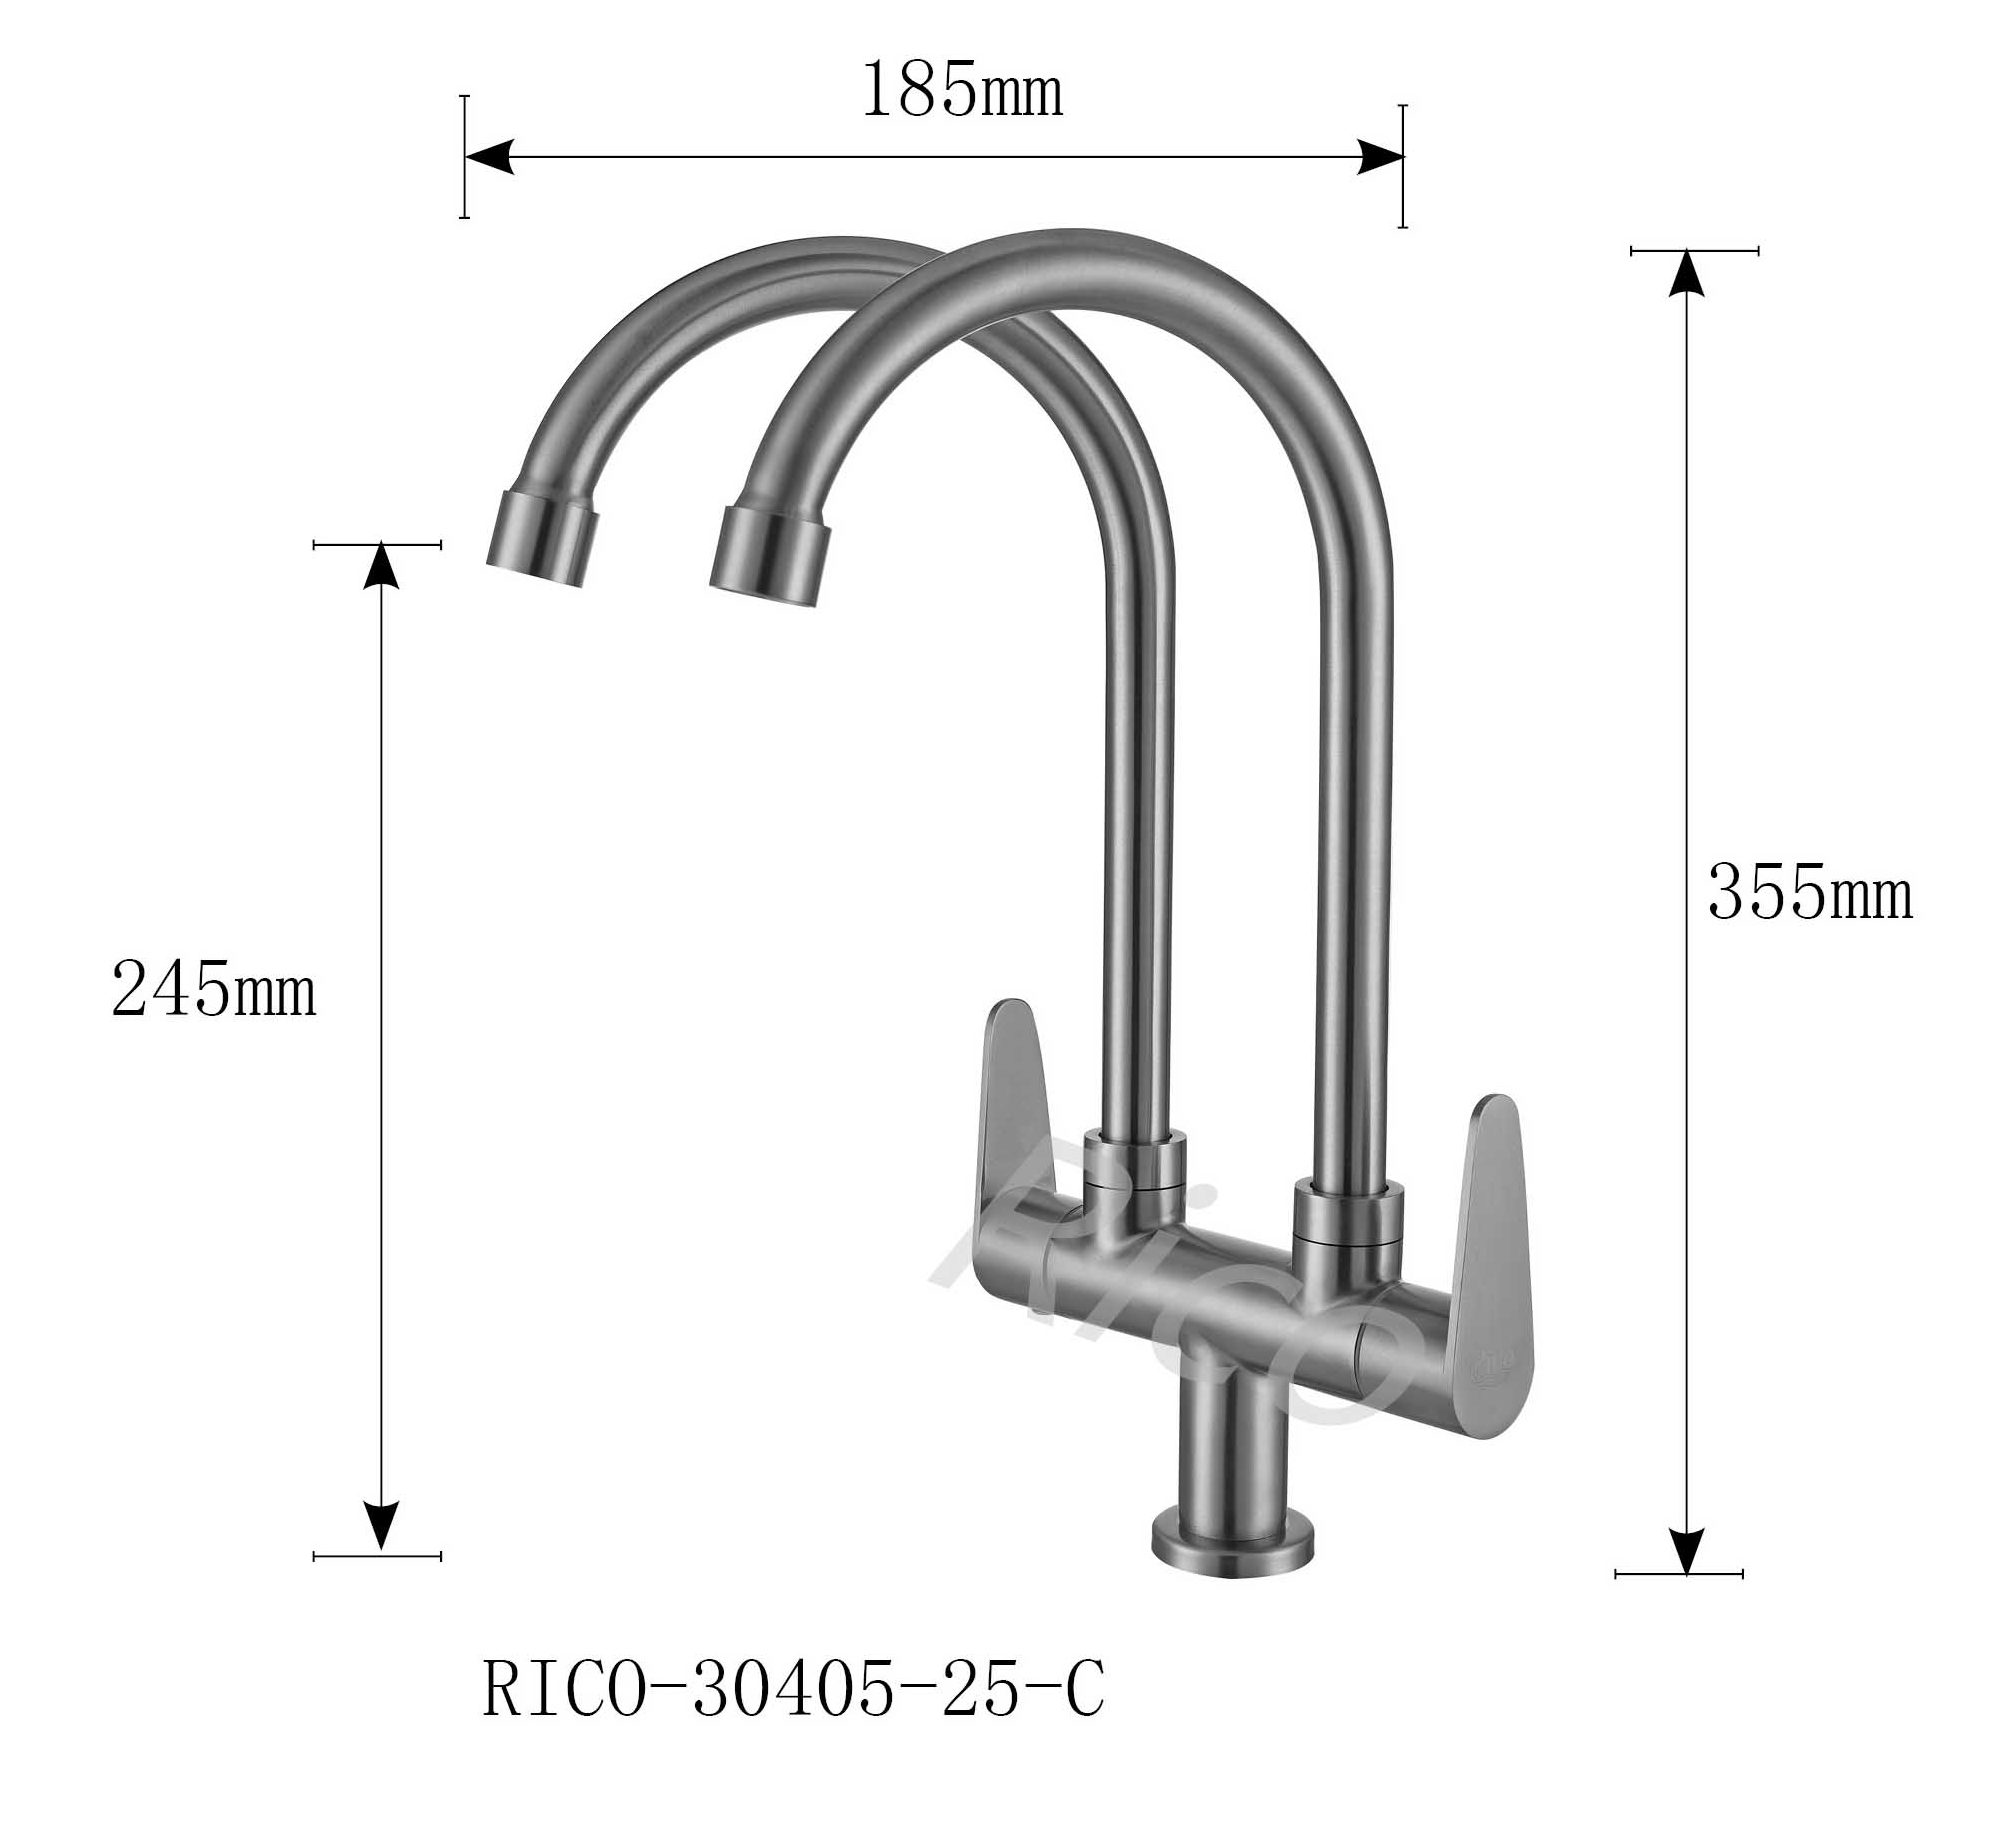 Rico : Stainless Steel Sink Cold Tap – RICO-30405-25-C